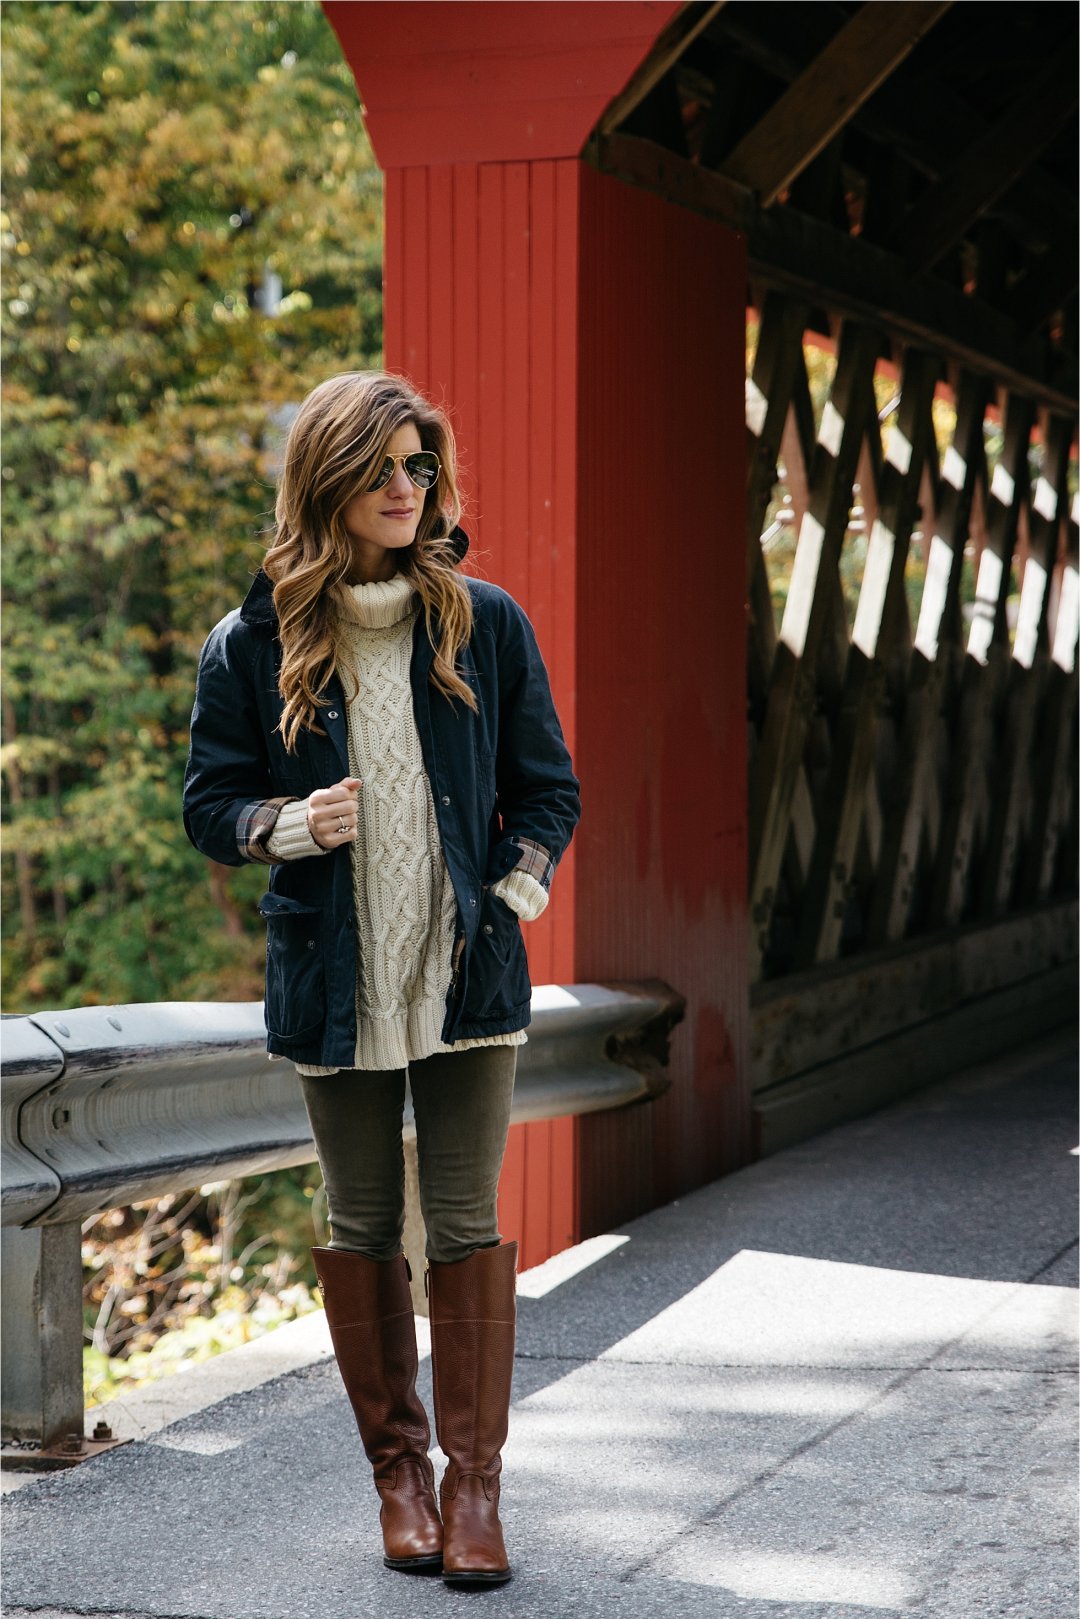 Fall outfit, tory burch riding boots, barbour jacket, olive green pants, oversized cableknit turtleneck sweater